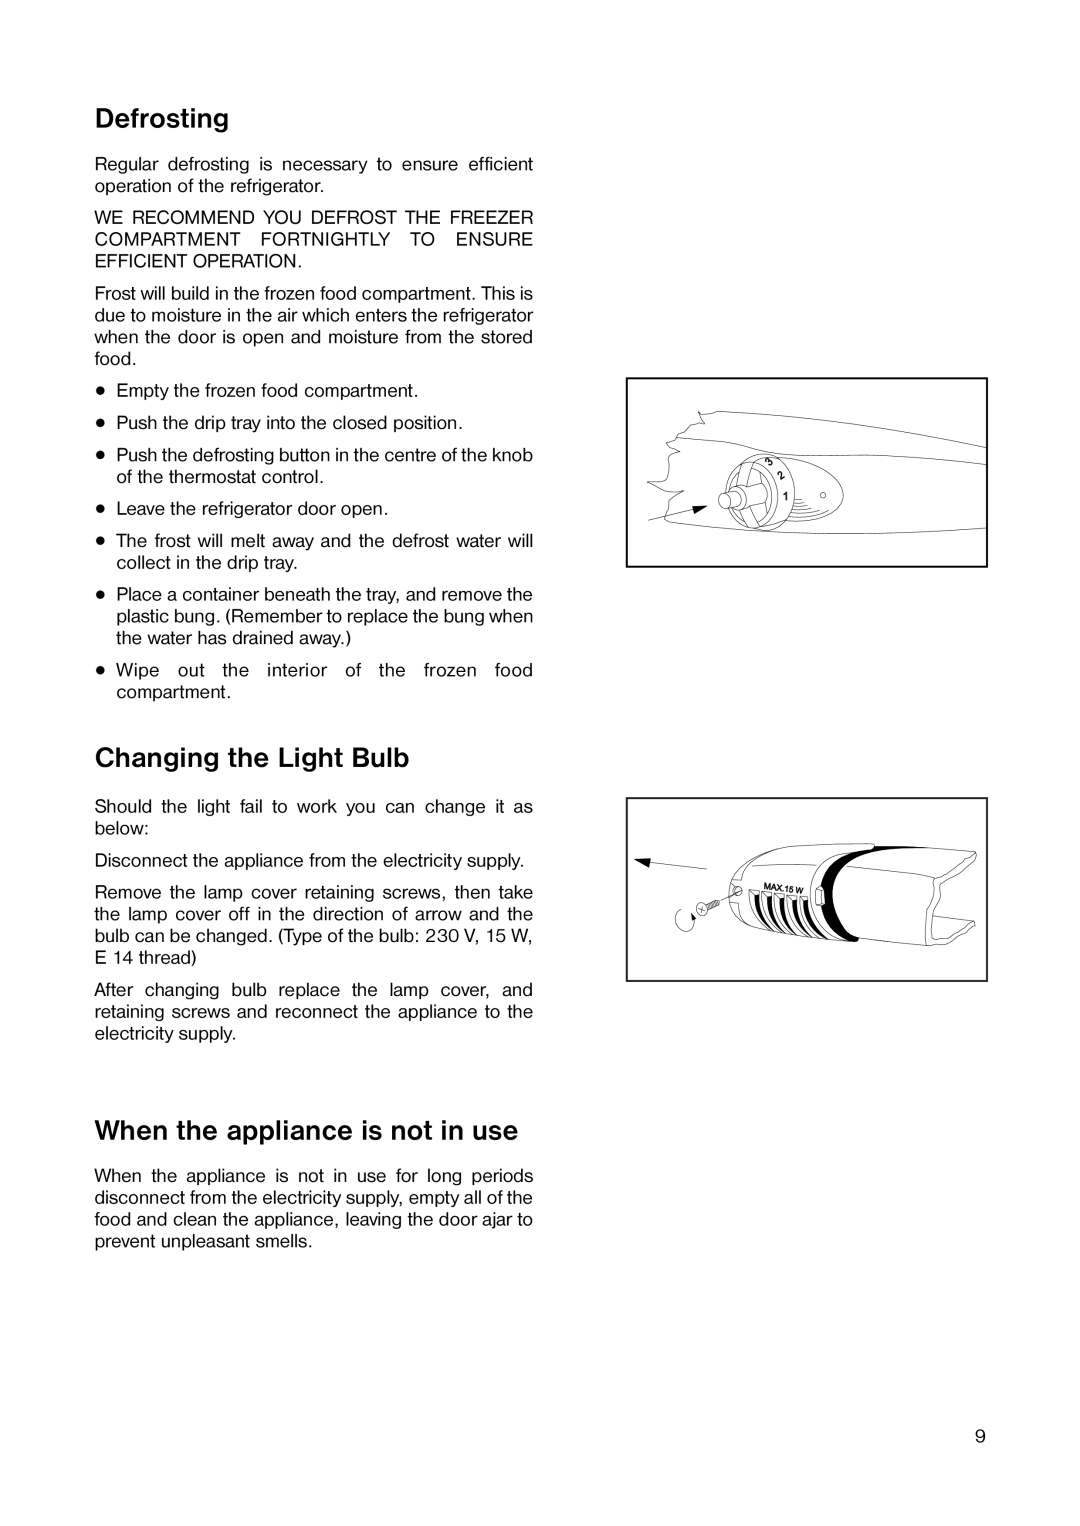 Tricity Bendix TB 55 R installation instructions Defrosting, Changing the Light Bulb, When the appliance is not in use 